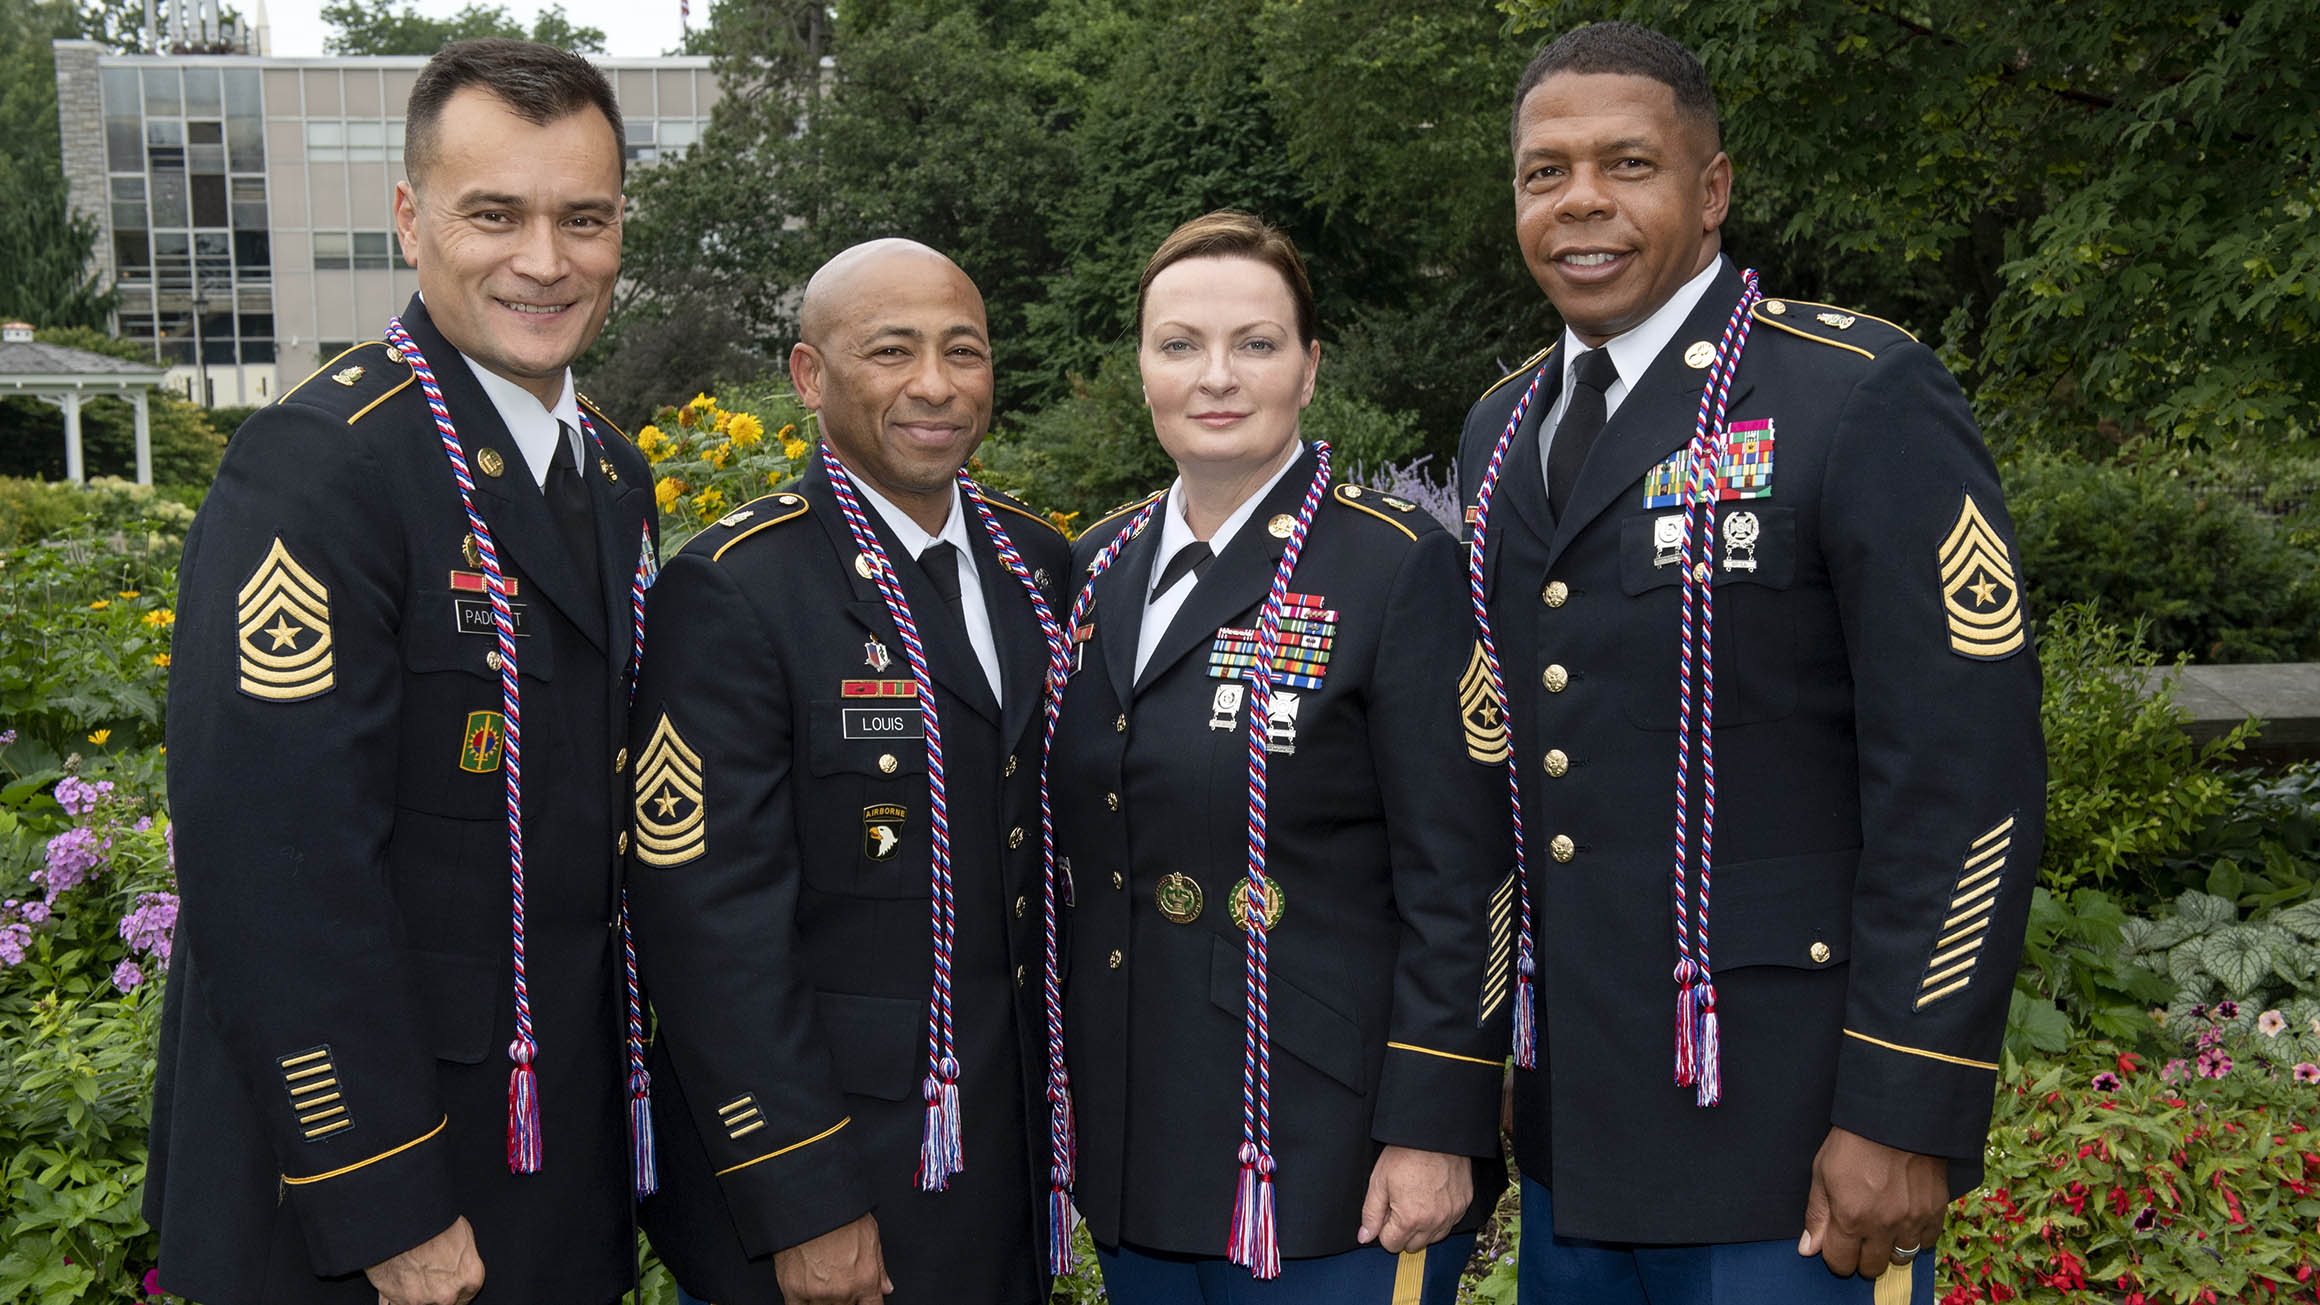 Four sergeants major in the Army pose for a photo with Army uniforms and military honor cords